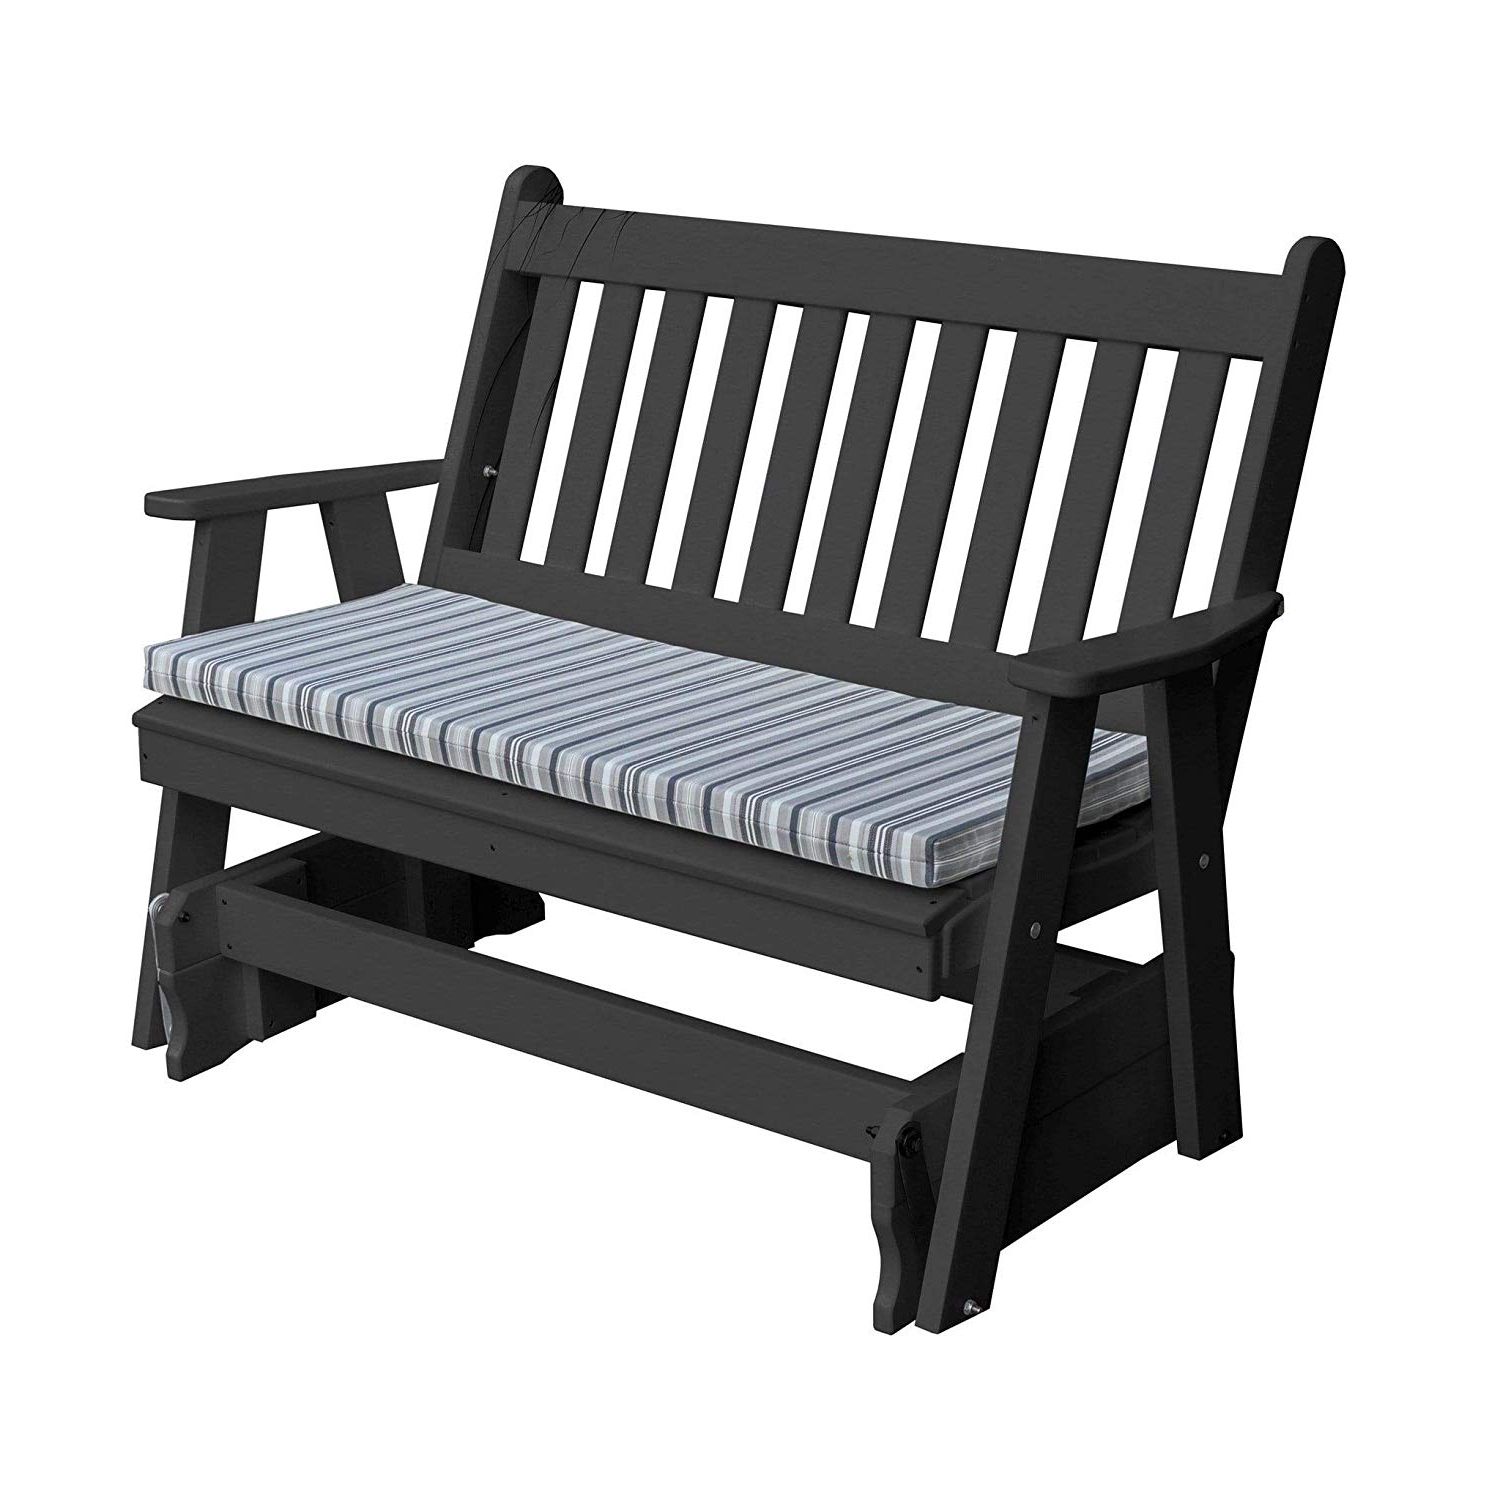 Traditional Glider Benches Pertaining To 2020 Amazon : Kunkle Holdings, Llc Outdoor 5 Foot Glider In (View 10 of 30)